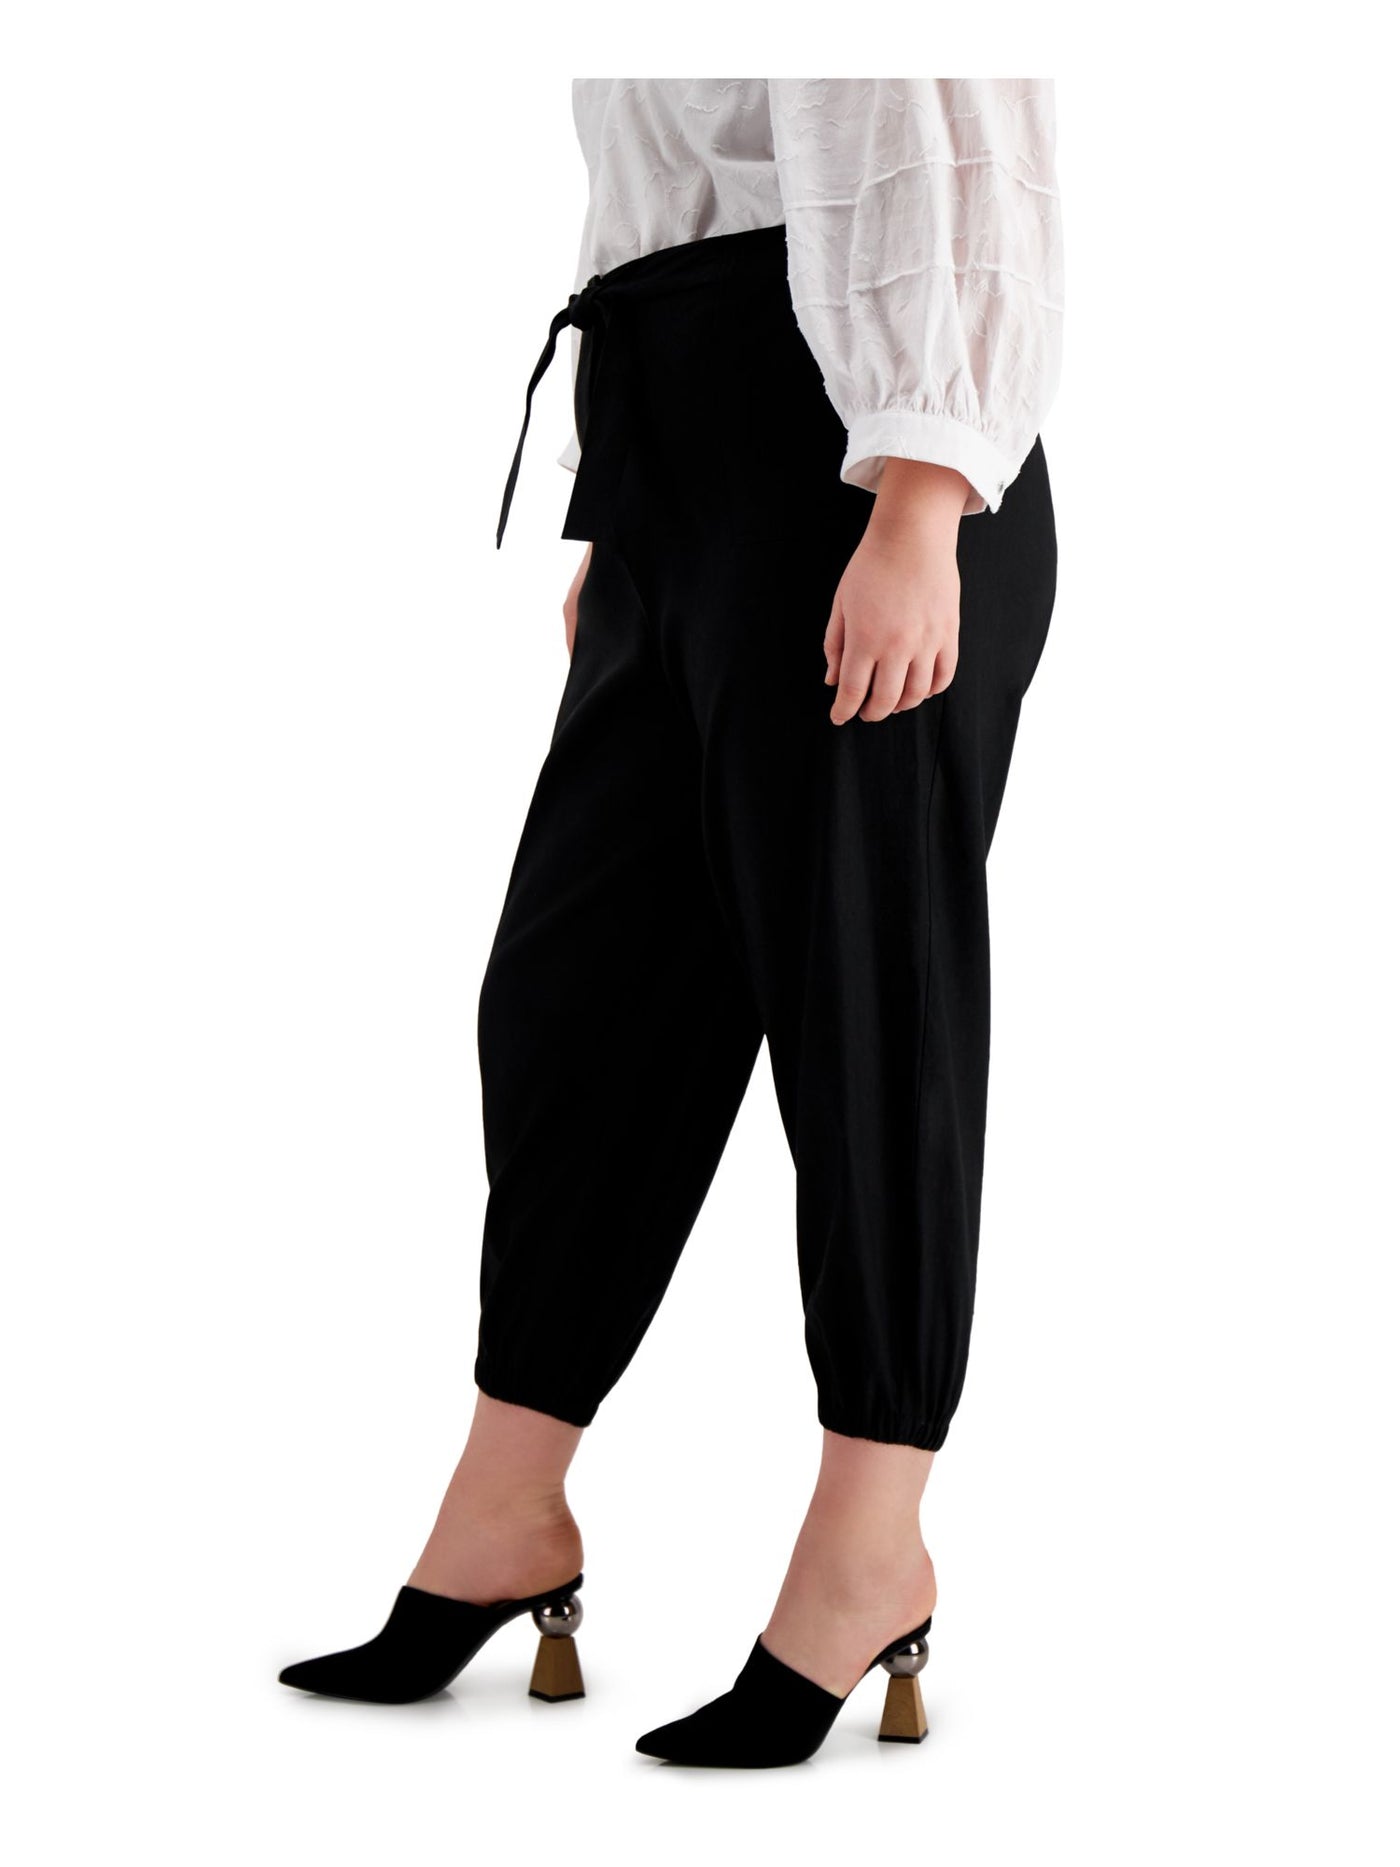 CALVIN KLEIN Womens Black Tie Pocketed Faux Front Fly Wear To Work High Waist Pants Plus 2X